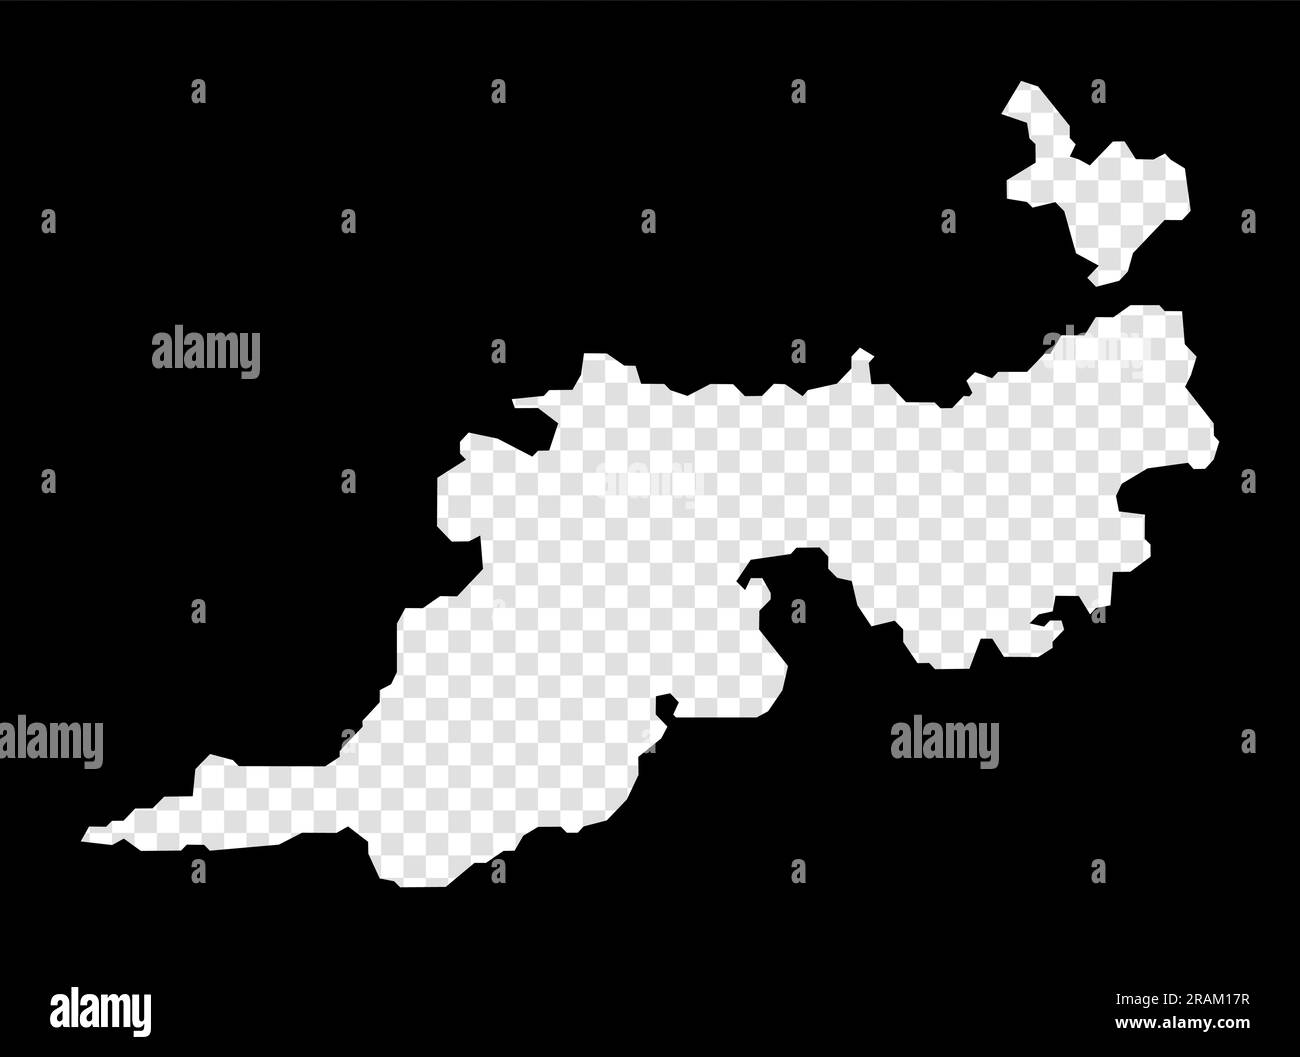 Stencil map of Guana Island. Simple and minimal transparent map of Guana Island. Black rectangle with cut shape of the area. Beautiful vector illustra Stock Vector